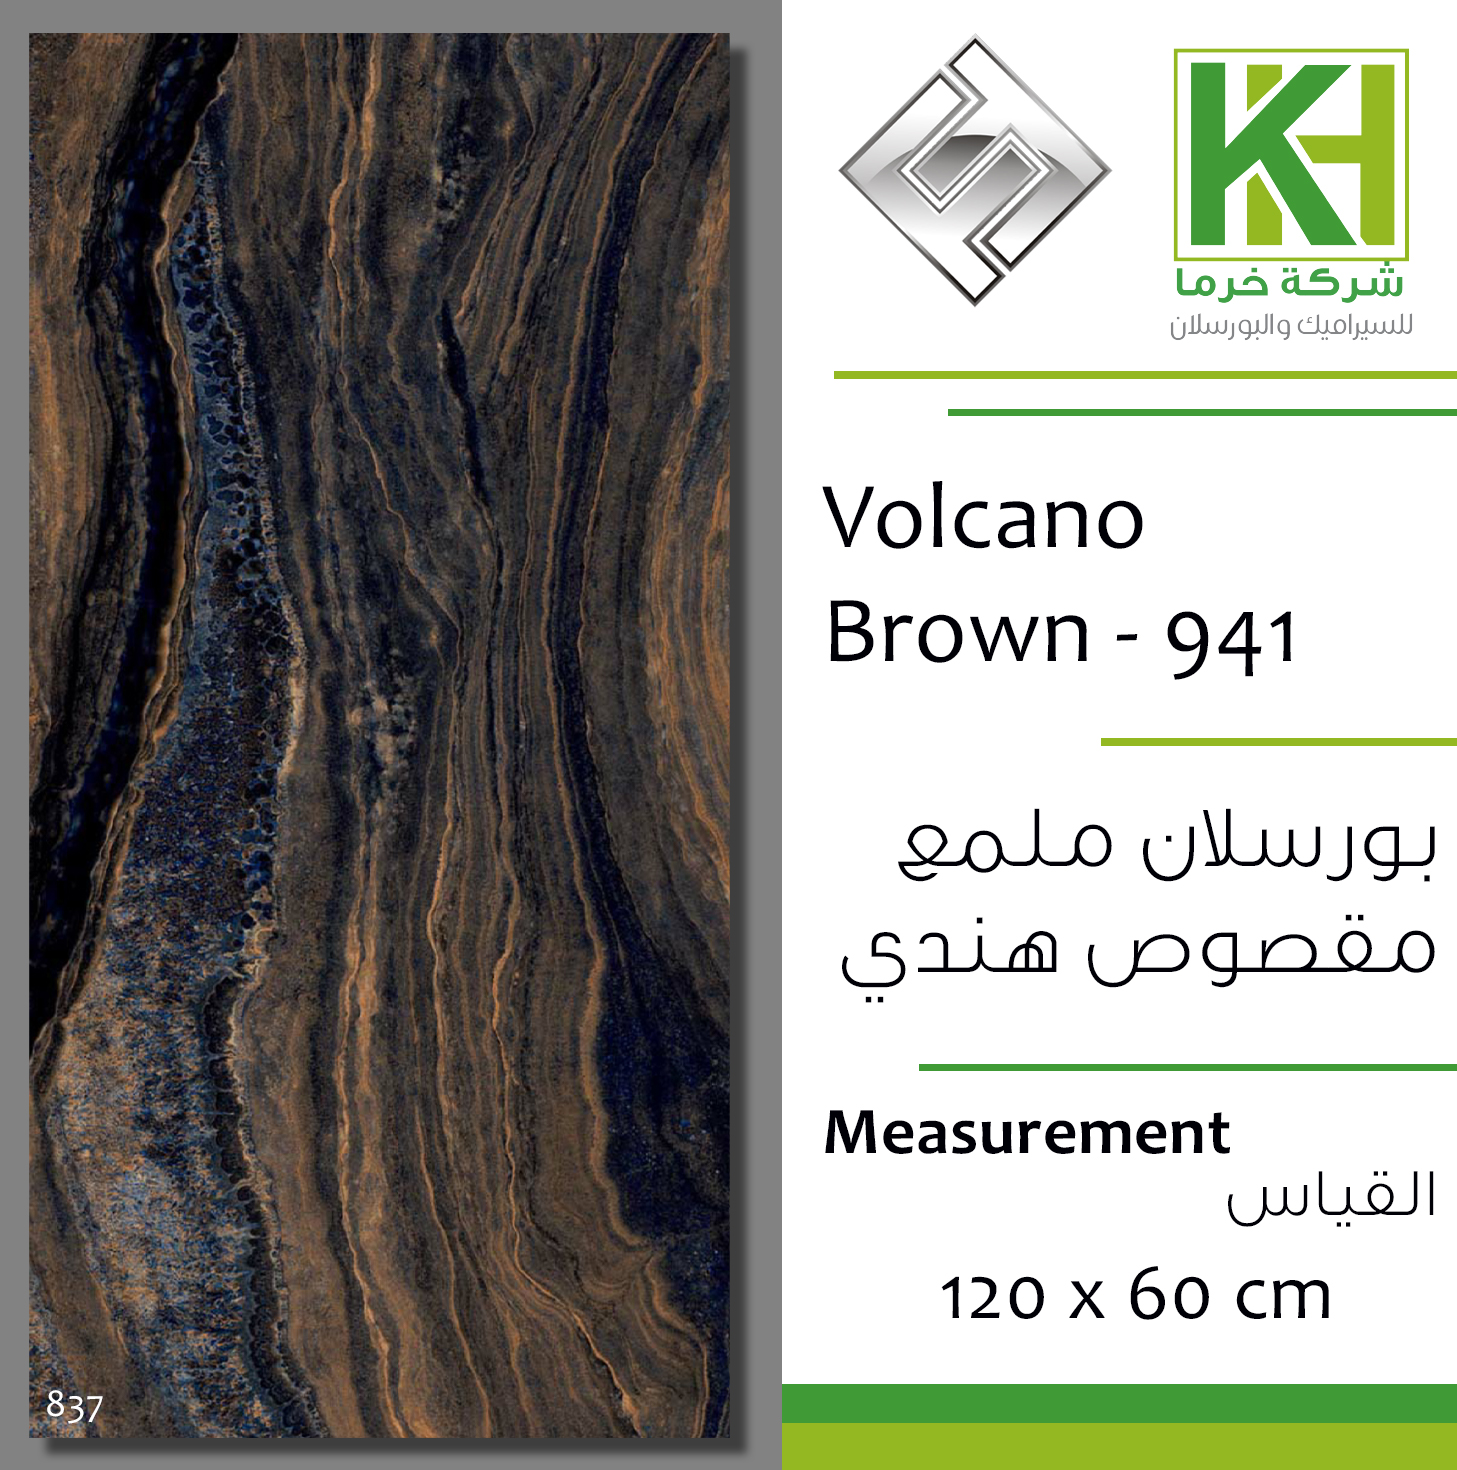 Picture of Indian porcelain Glossy tile 60x120cm Volcano Brown - 941